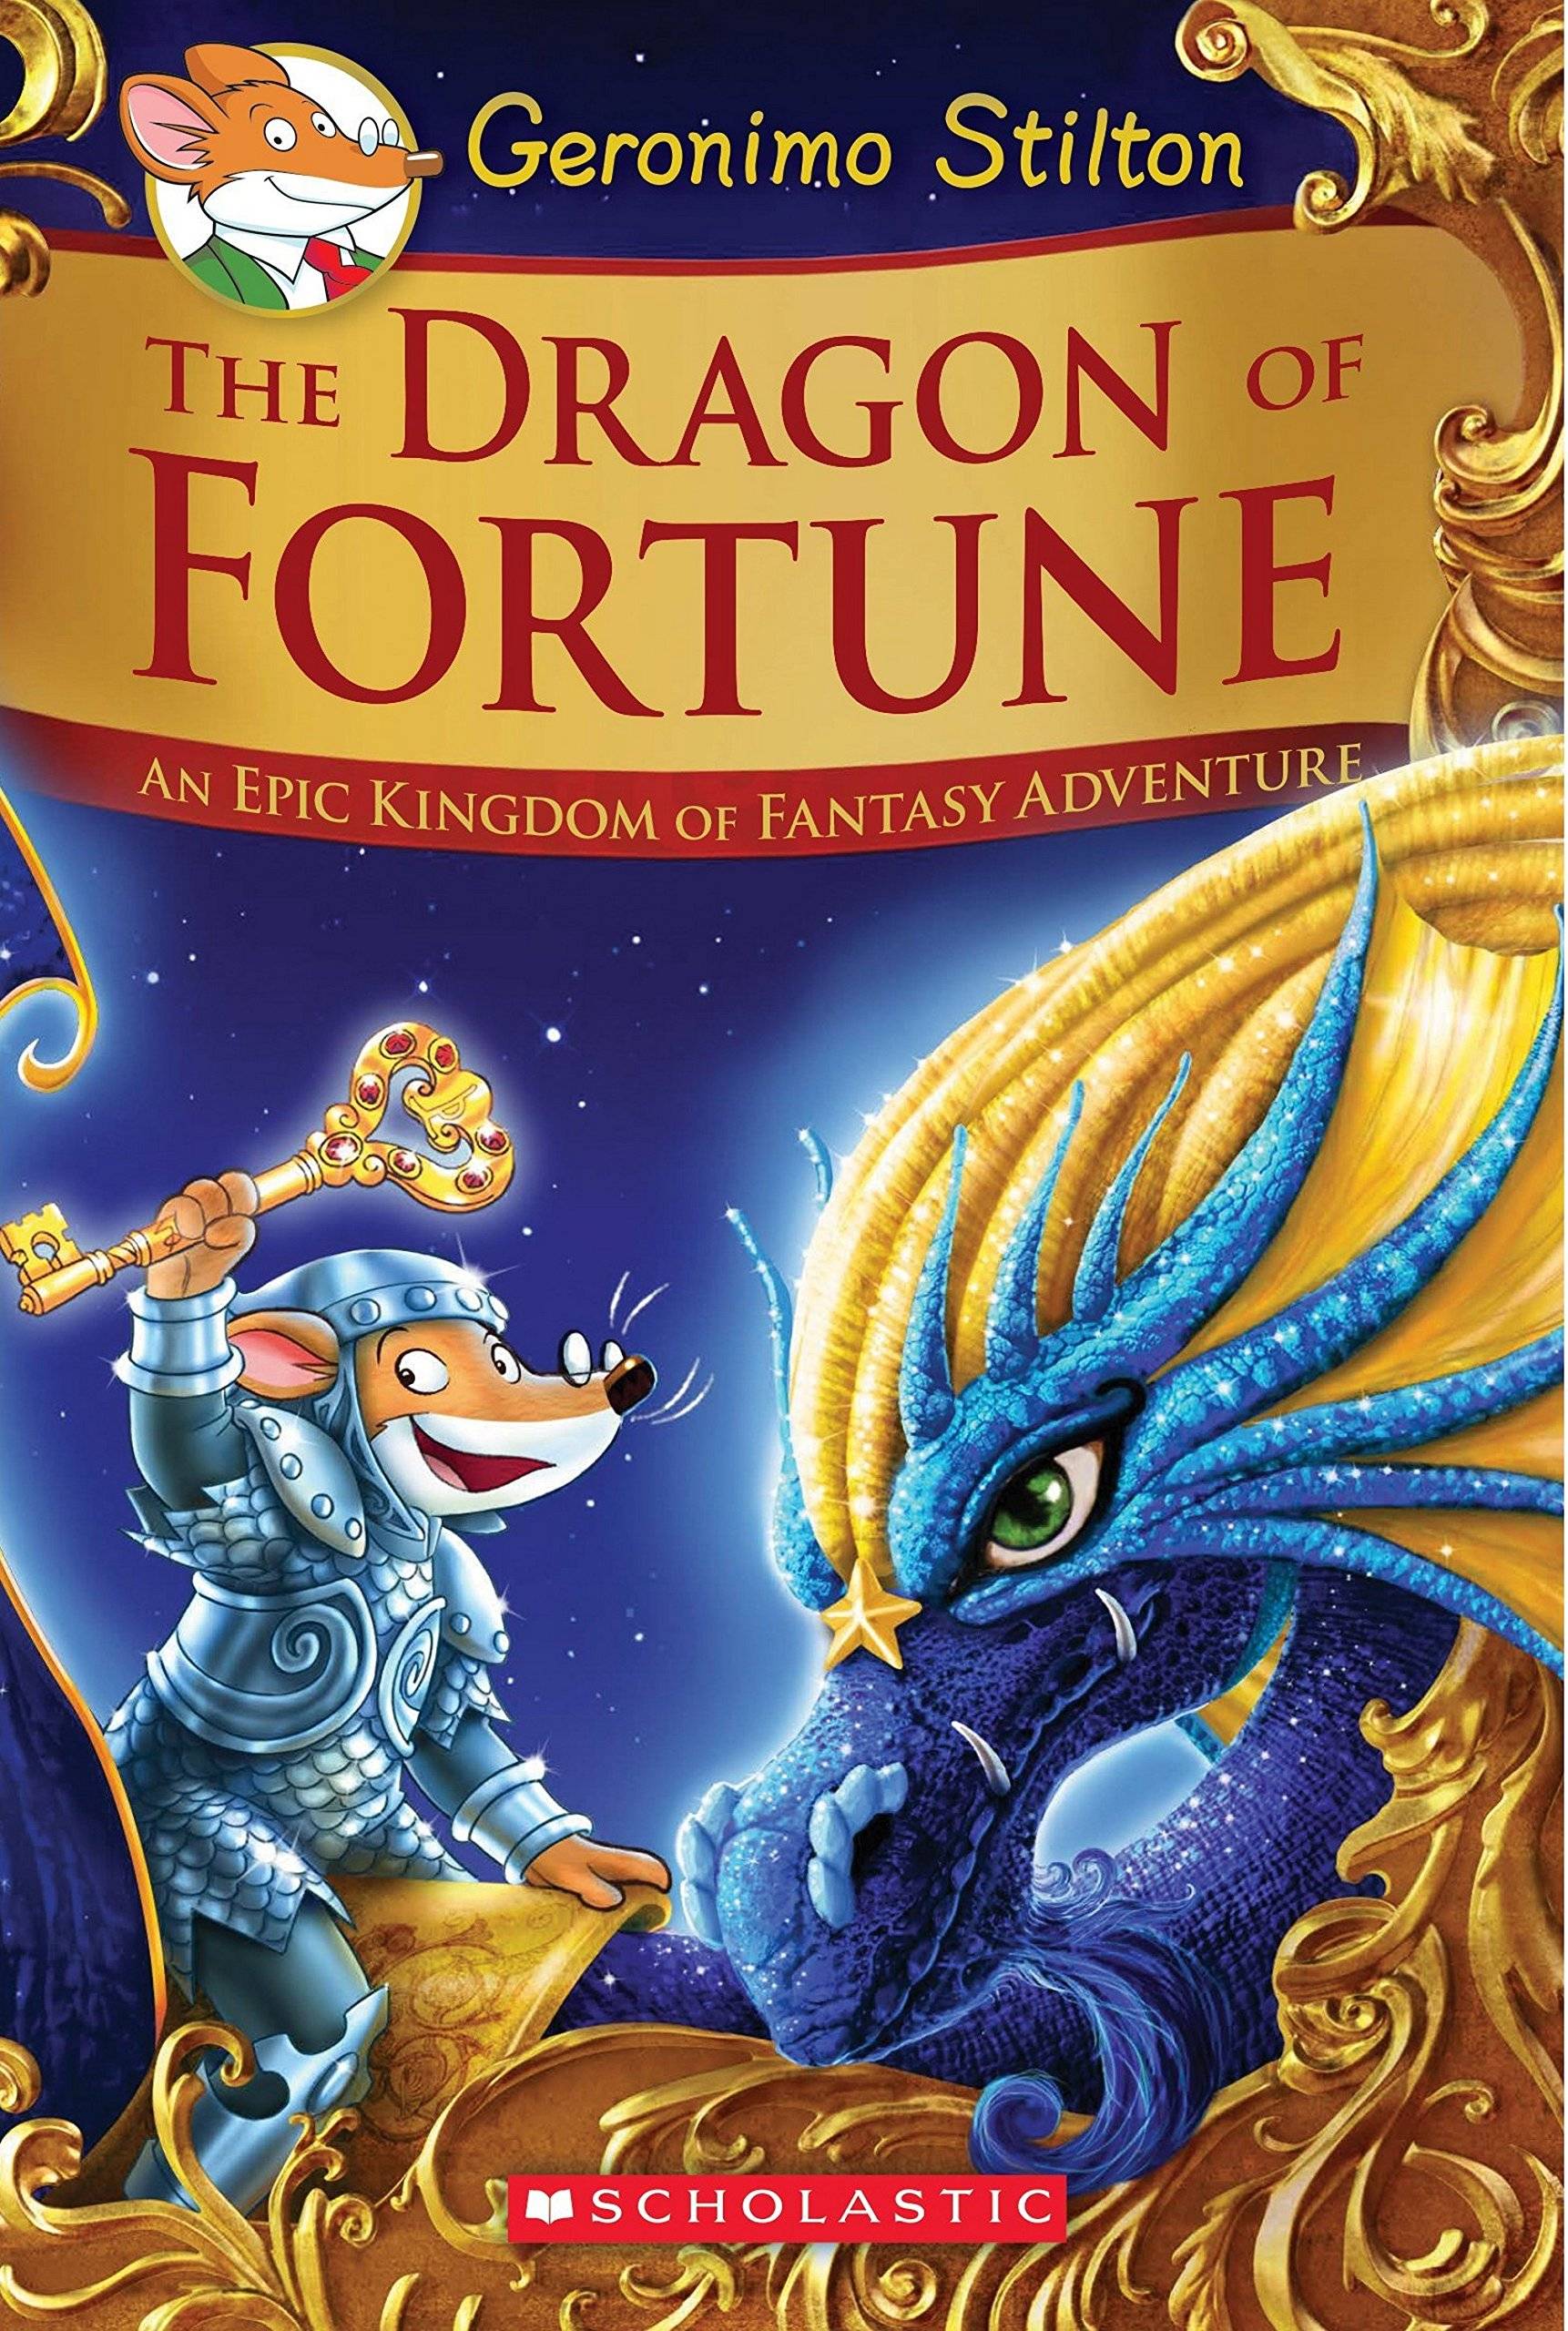 IMG : Geronimo Stilton Special Edition The Dragon of Fortune